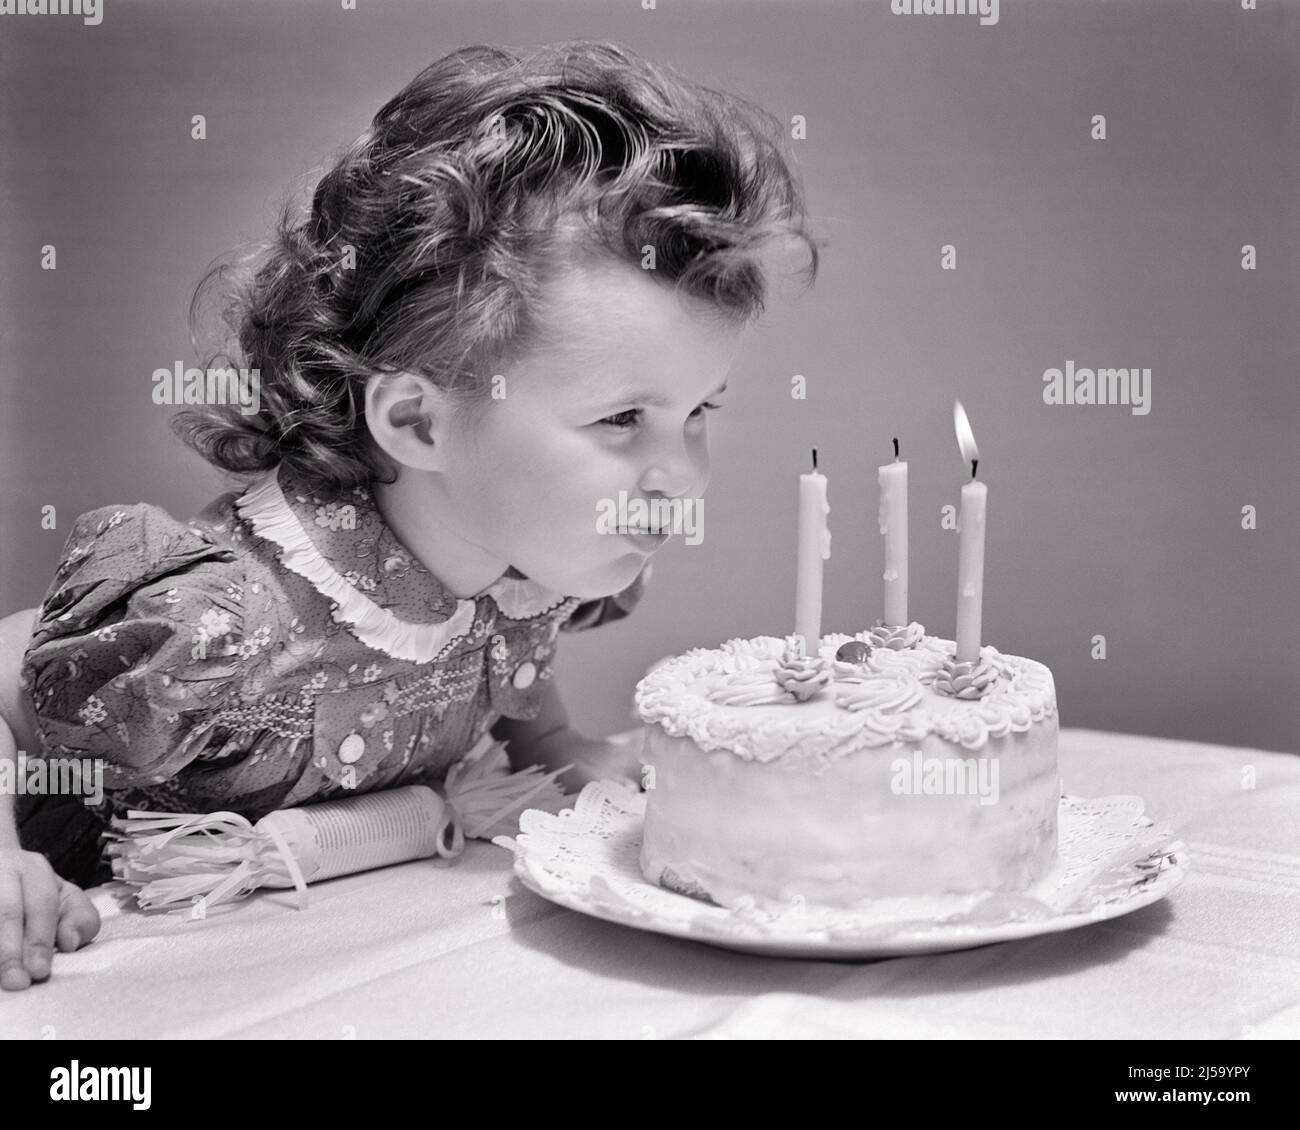 1930s 1940s CUTE THREE YEAR OLD GIRL BLOWING OUT THE CANDLES ON BIRTHDAY CAKE MAKING A WISH - j5443 HAR001 HARS COPY SPACE WISHING B&W BRUNETTE CELEBRATING HAPPINESS HEAD AND SHOULDERS CURLS EXCITEMENT BLOWING OUT WISH BLOW OUT PLEASANT AGREEABLE CHARMING GROWTH JUVENILES LOVABLE PLEASING ADORABLE APPEALING BLACK AND WHITE CAUCASIAN ETHNICITY CURLY HAIR HAR001 OLD FASHIONED Stock Photo